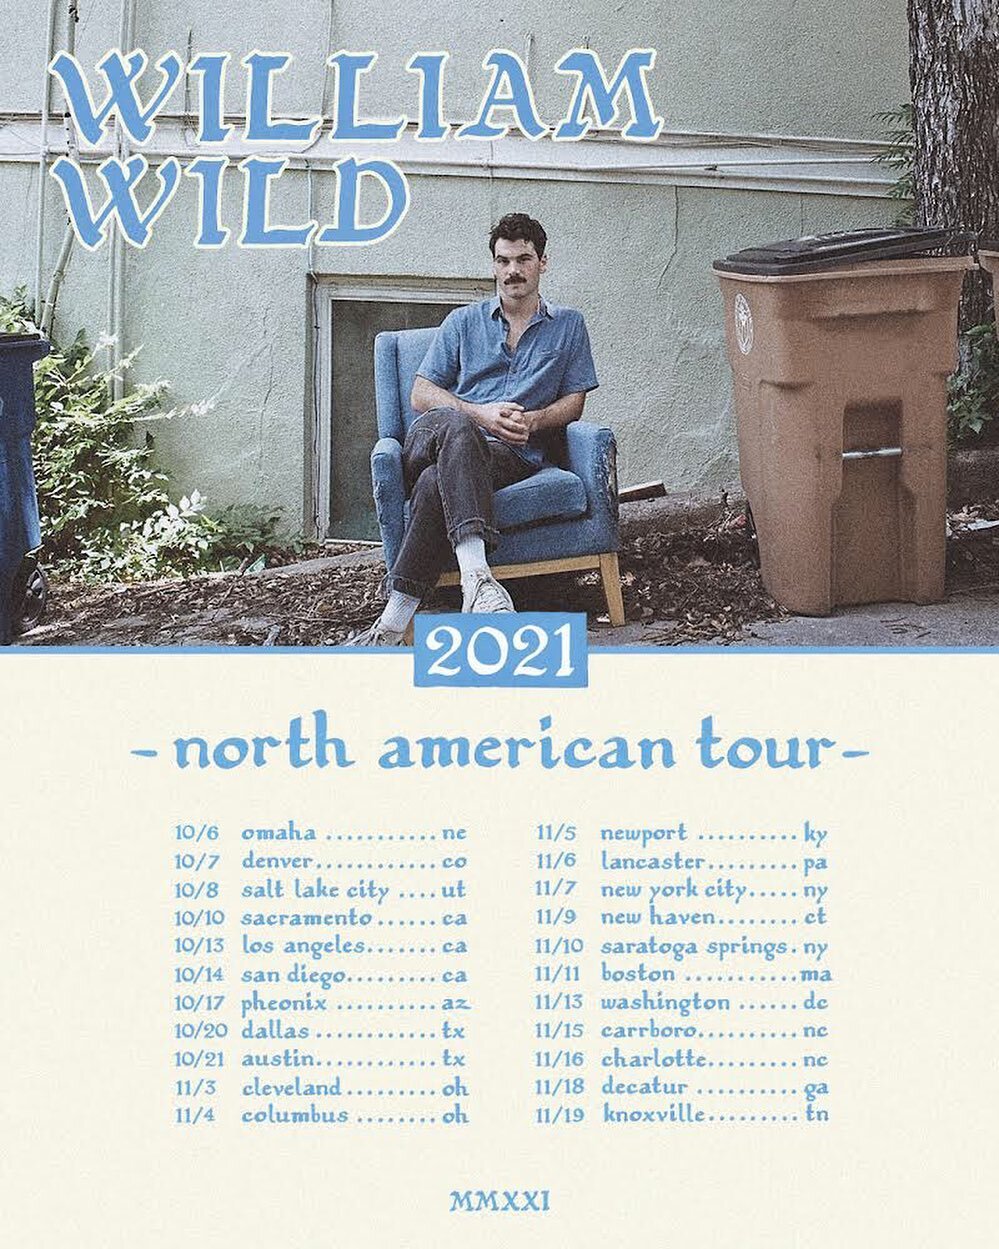 Tickets on sale now! This tour is gonna be everything. I can&rsquo;t wait my people! Link in bio. Tag your friends in cities and I&rsquo;ll blow you a kiss for real. 

Poster designed by @echoramon